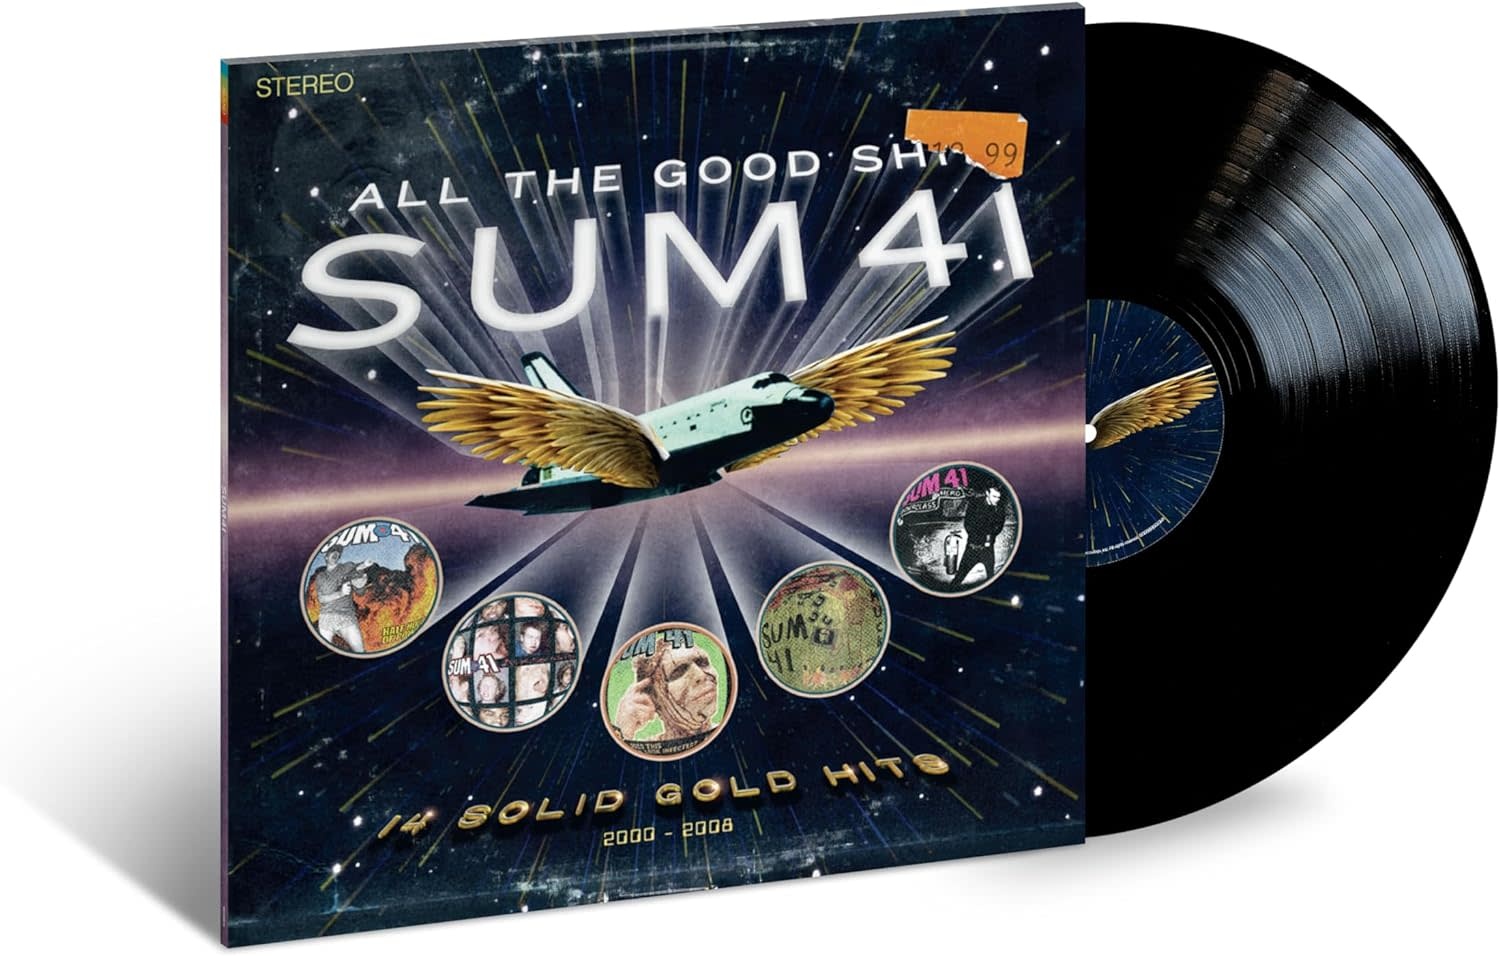 Sum 41 – All The Good Sh** - 14 Solid Gold Hits 2001-2008